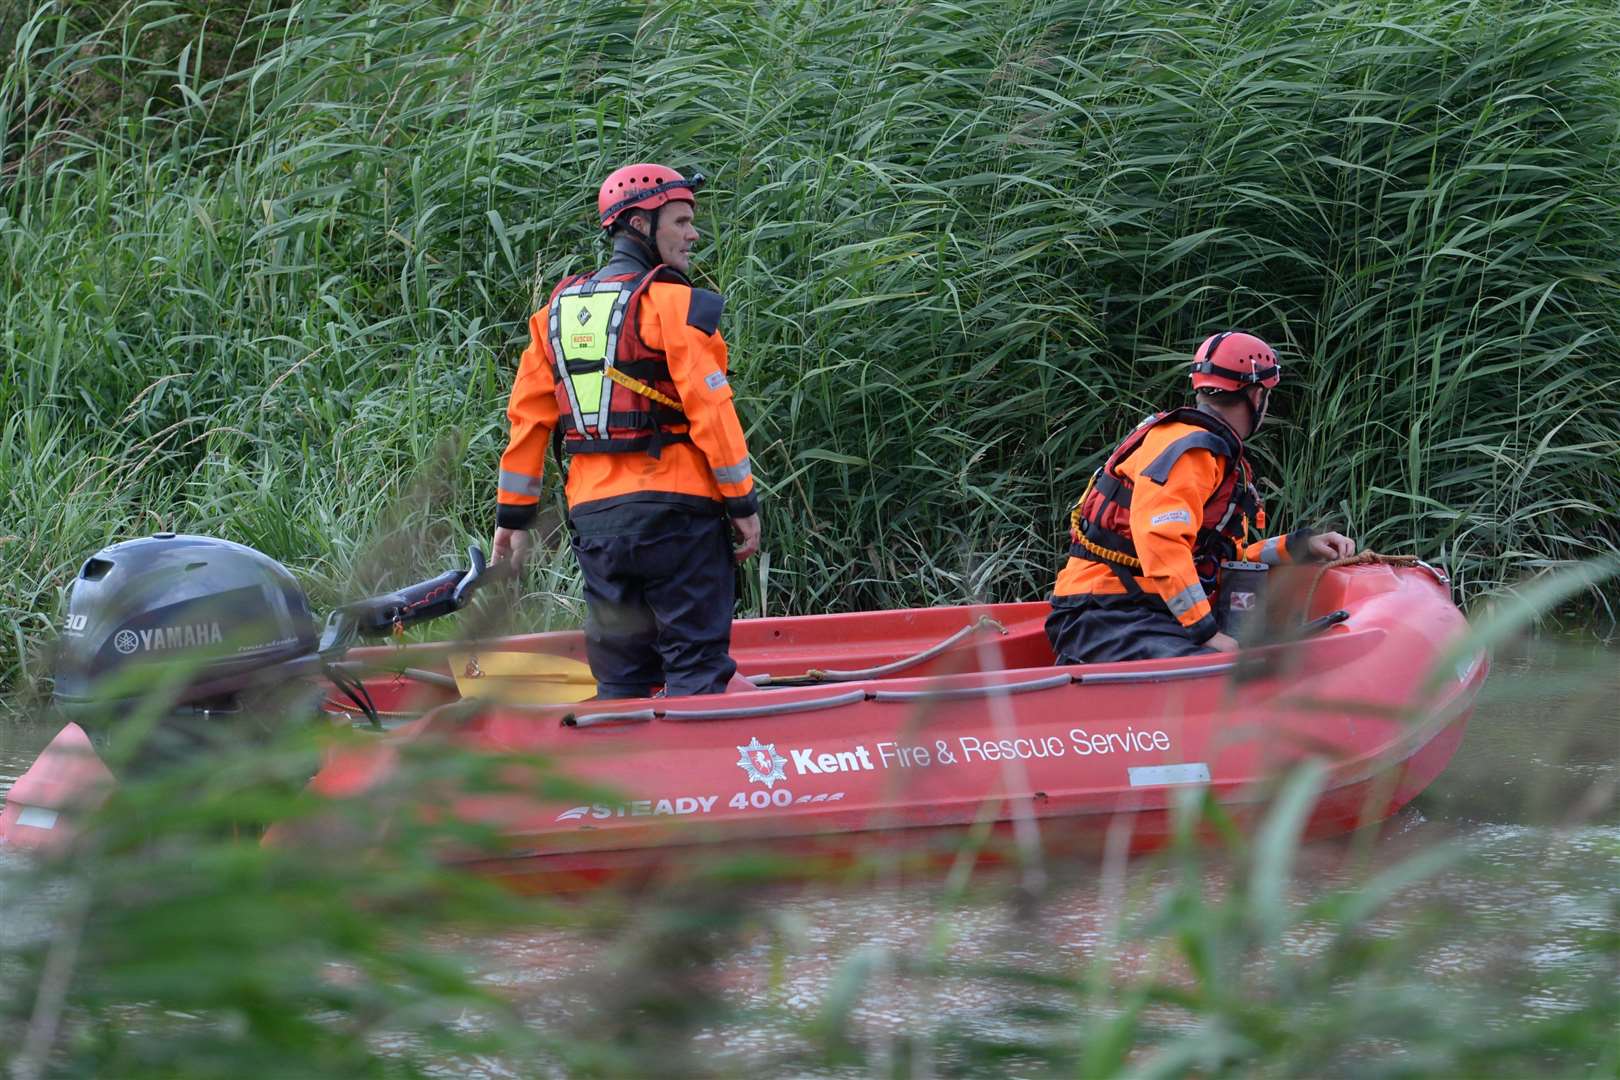 A Kent Fire and Rescue RIB as the search continued on the river